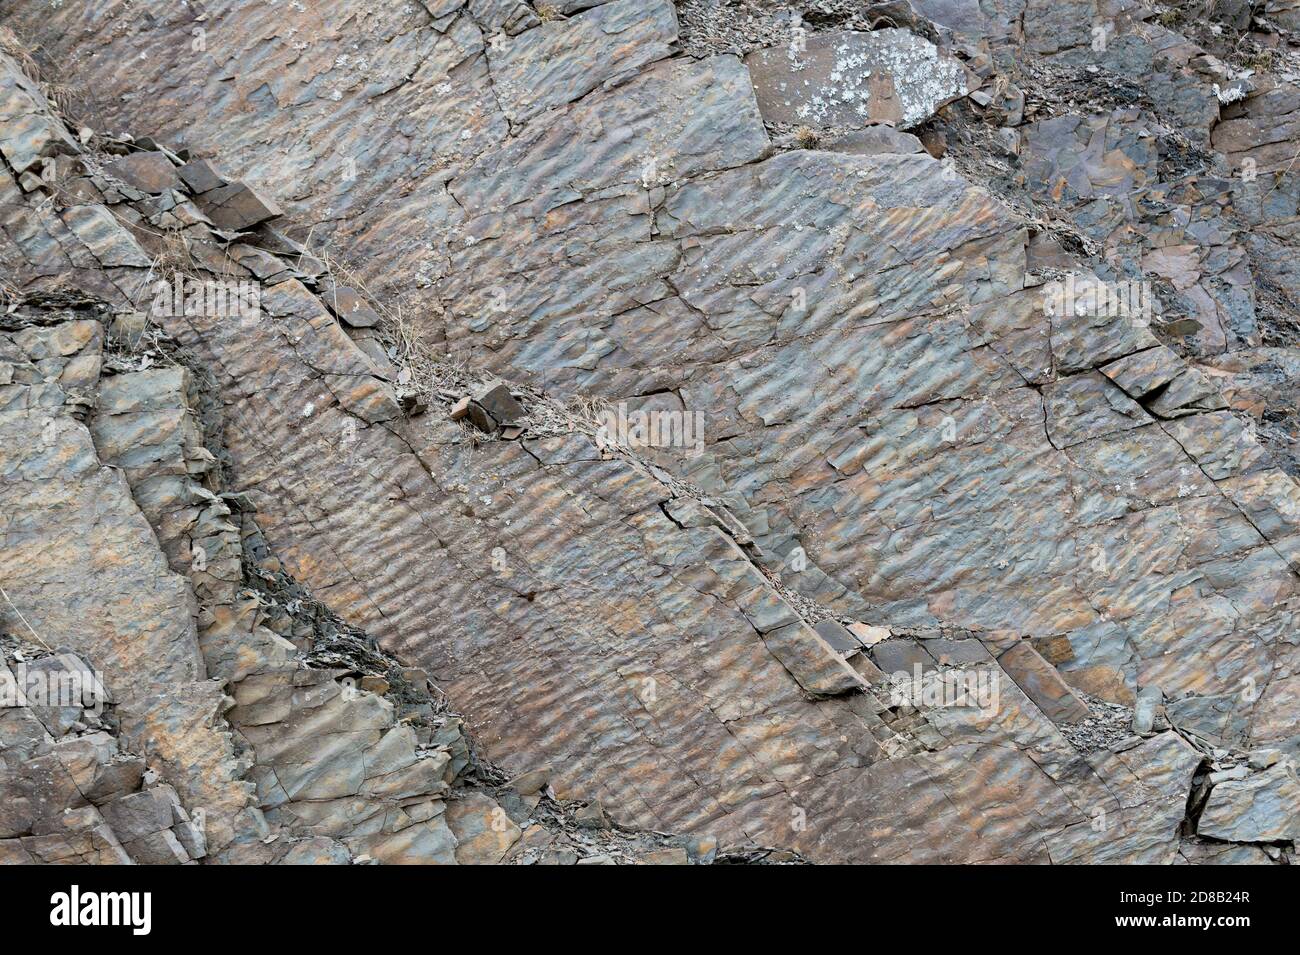 Fossilized ripple marks in a cliff. There are several layers. Stock Photo